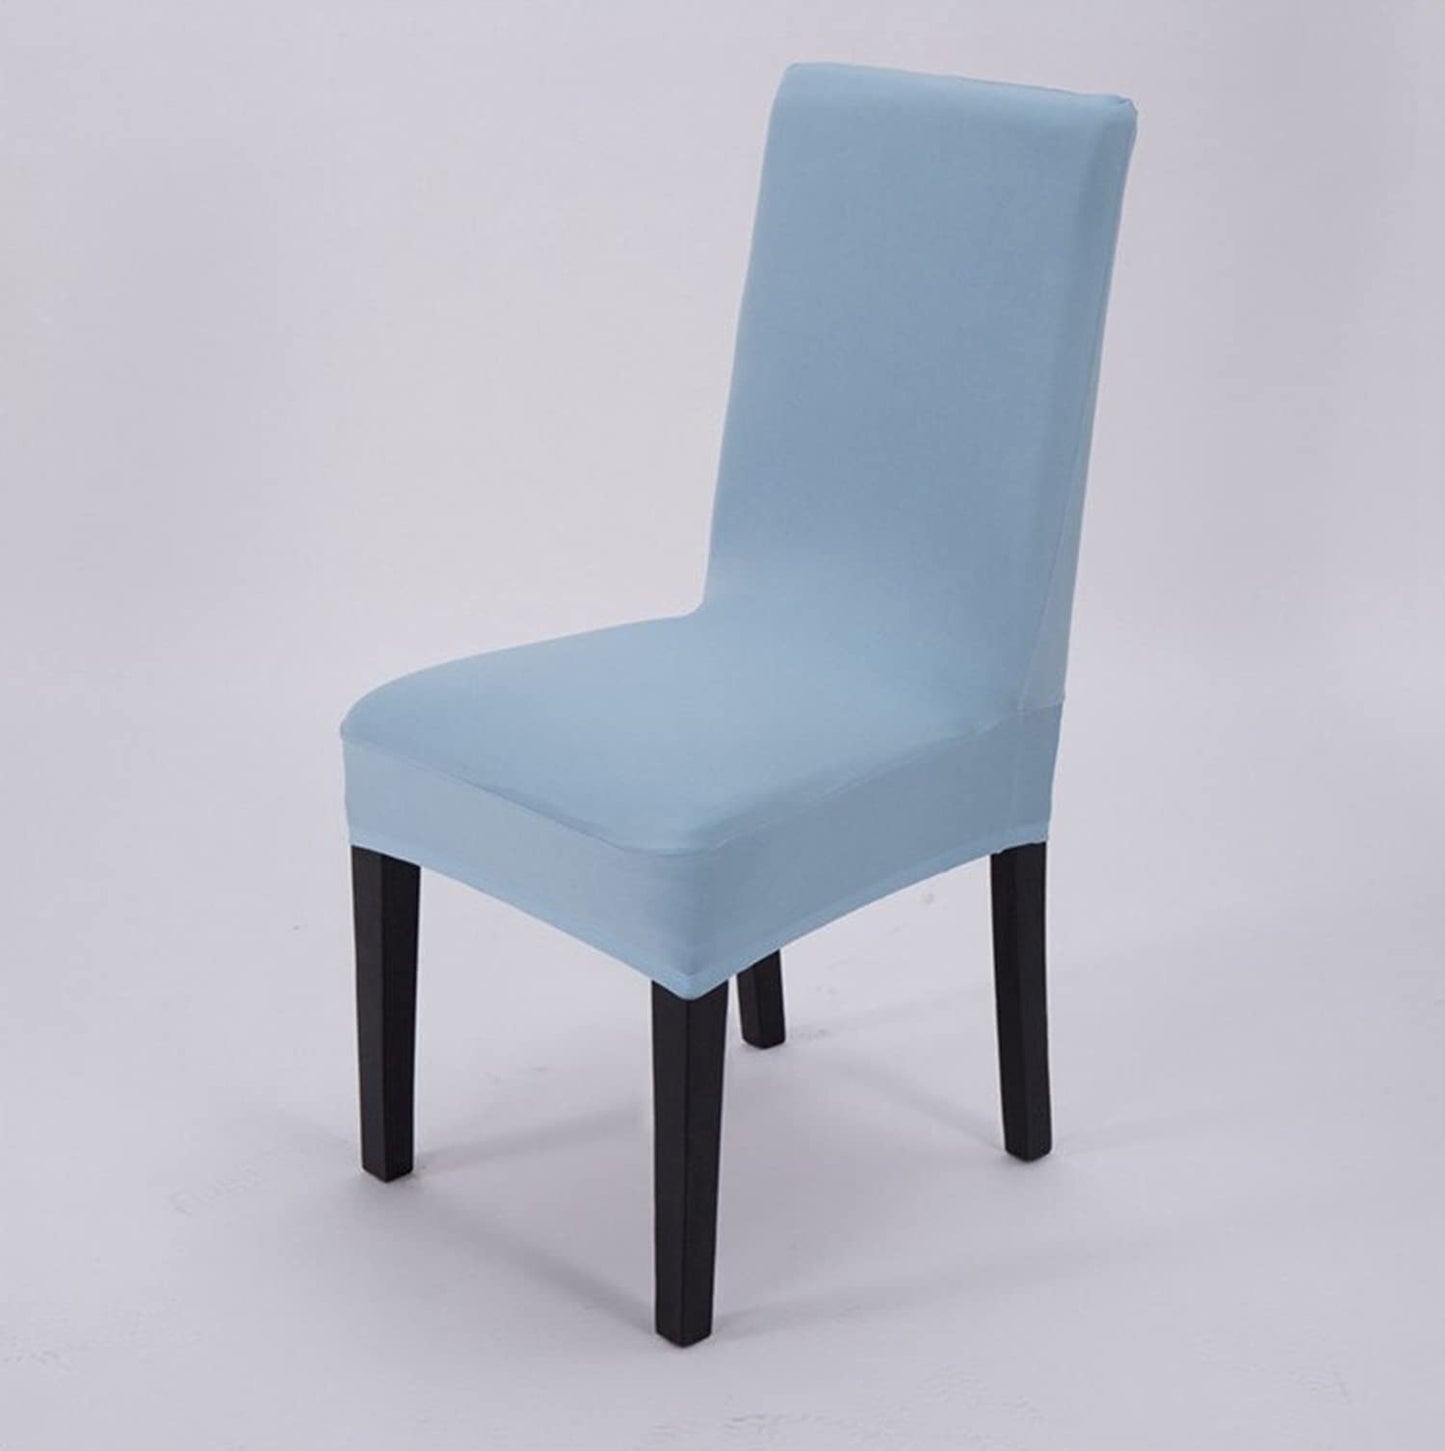 Solid Elastic Chair Cover - Light Blue